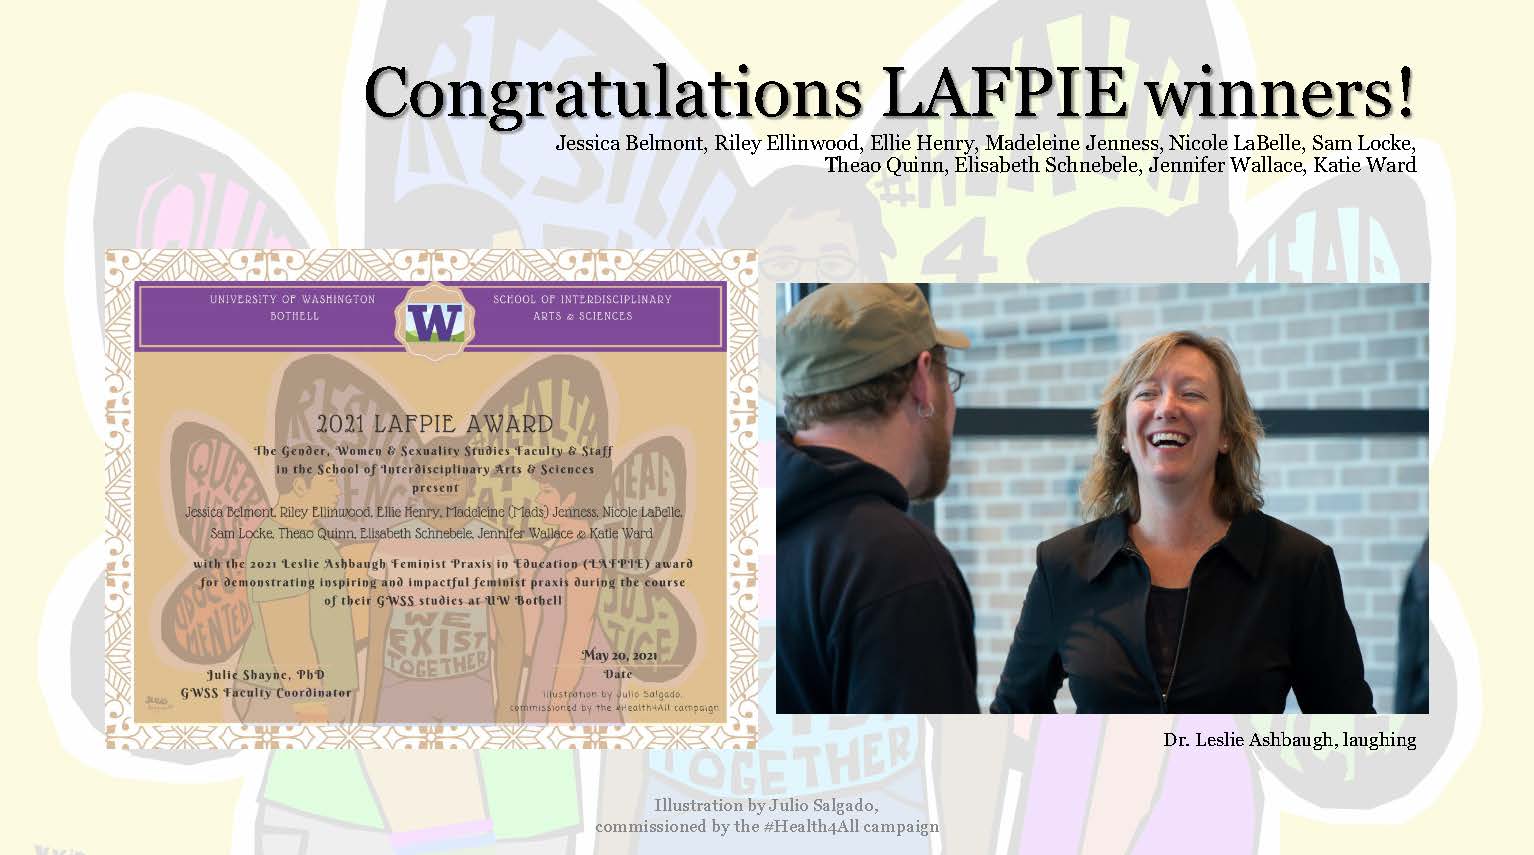 Text saying Congratulations LAFPIE winners! with the names of the new winners (listed in the post) an image of the award certificate and of Leslie Ashbaugh